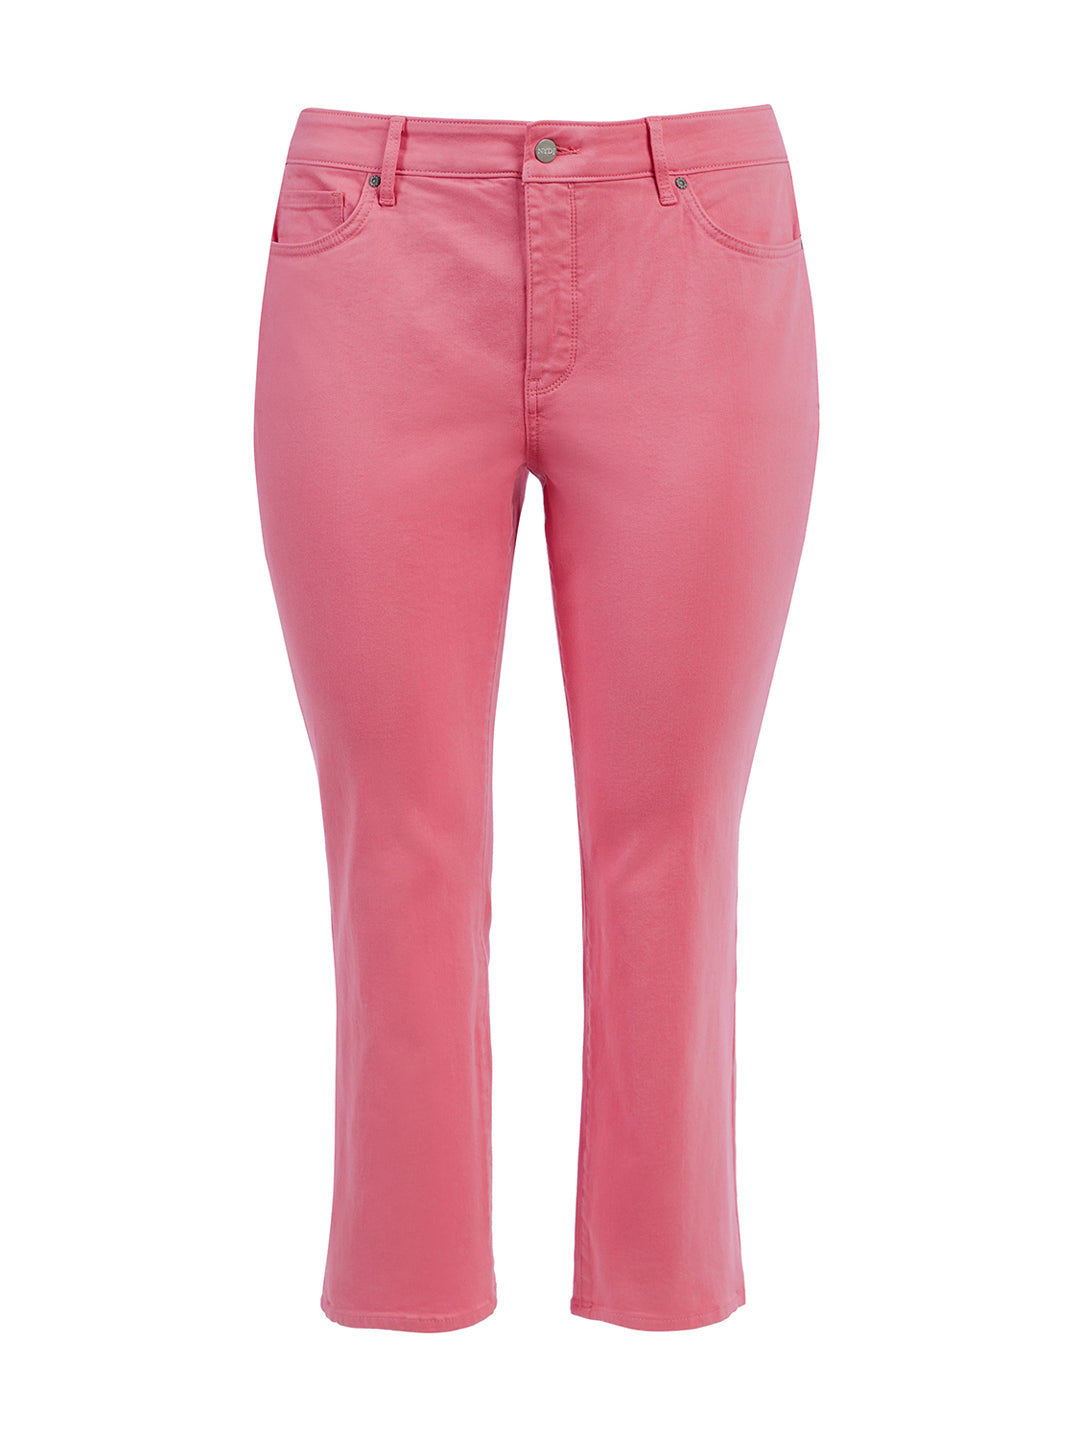 Pink Punch Marilyn Straight Ankle Jeans, NYDJ